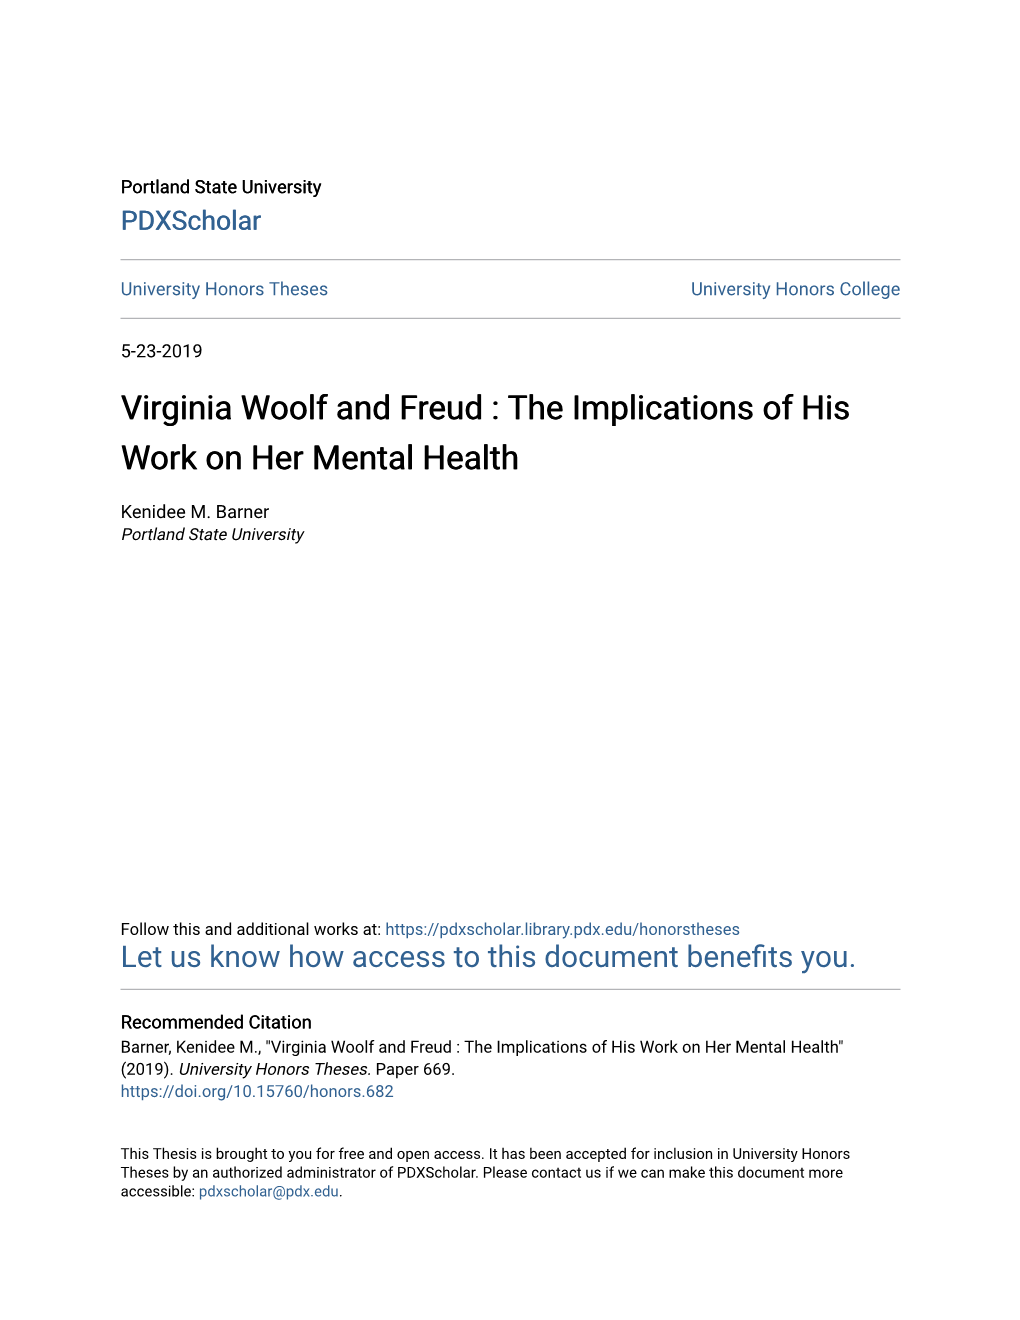 Virginia Woolf and Freud : the Implications of His Work on Her Mental Health